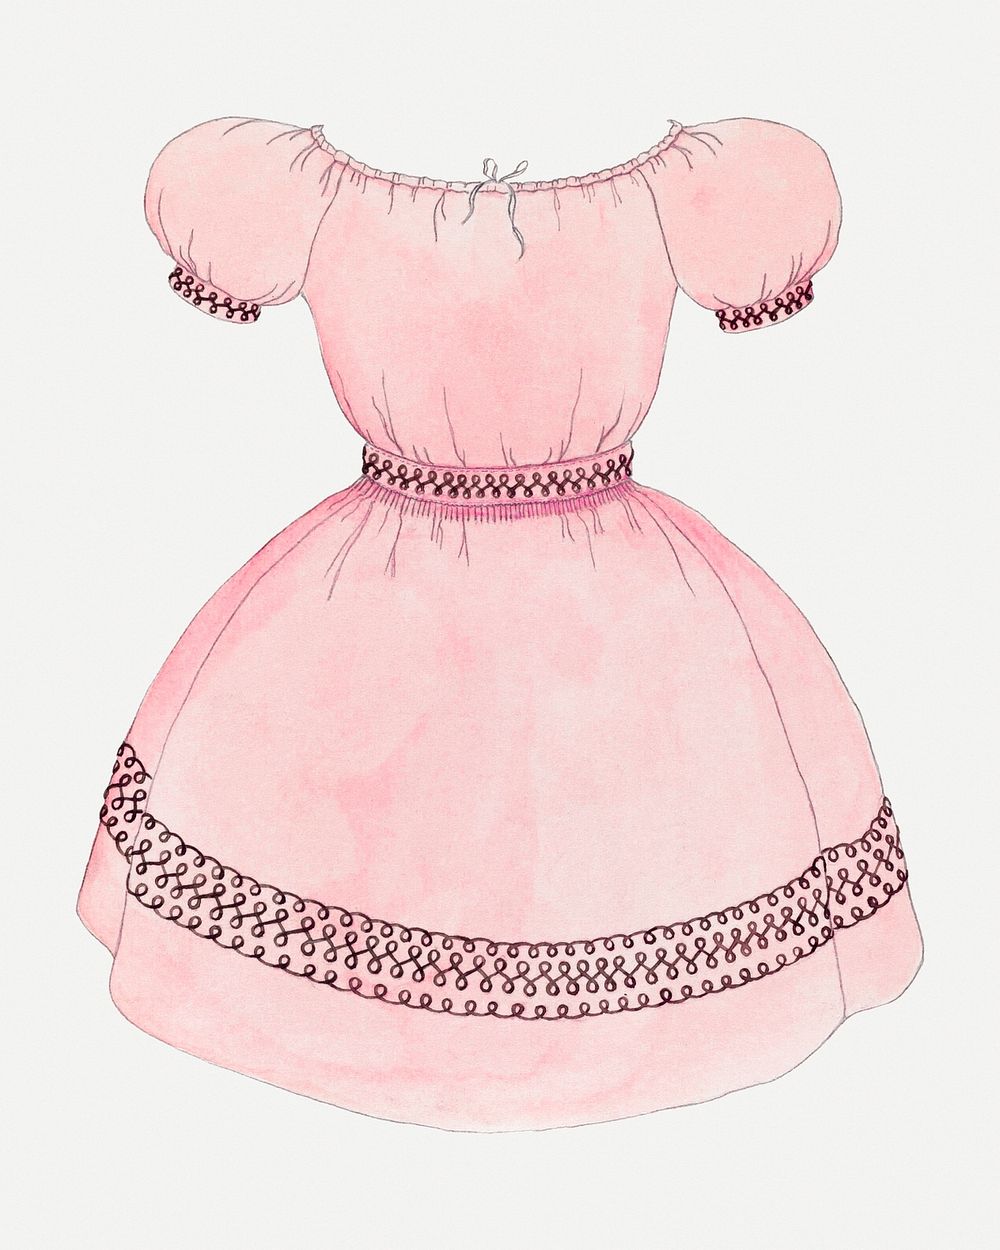 Pink dress vintage psd illustration, remixed from the artwork by Doris Beer.